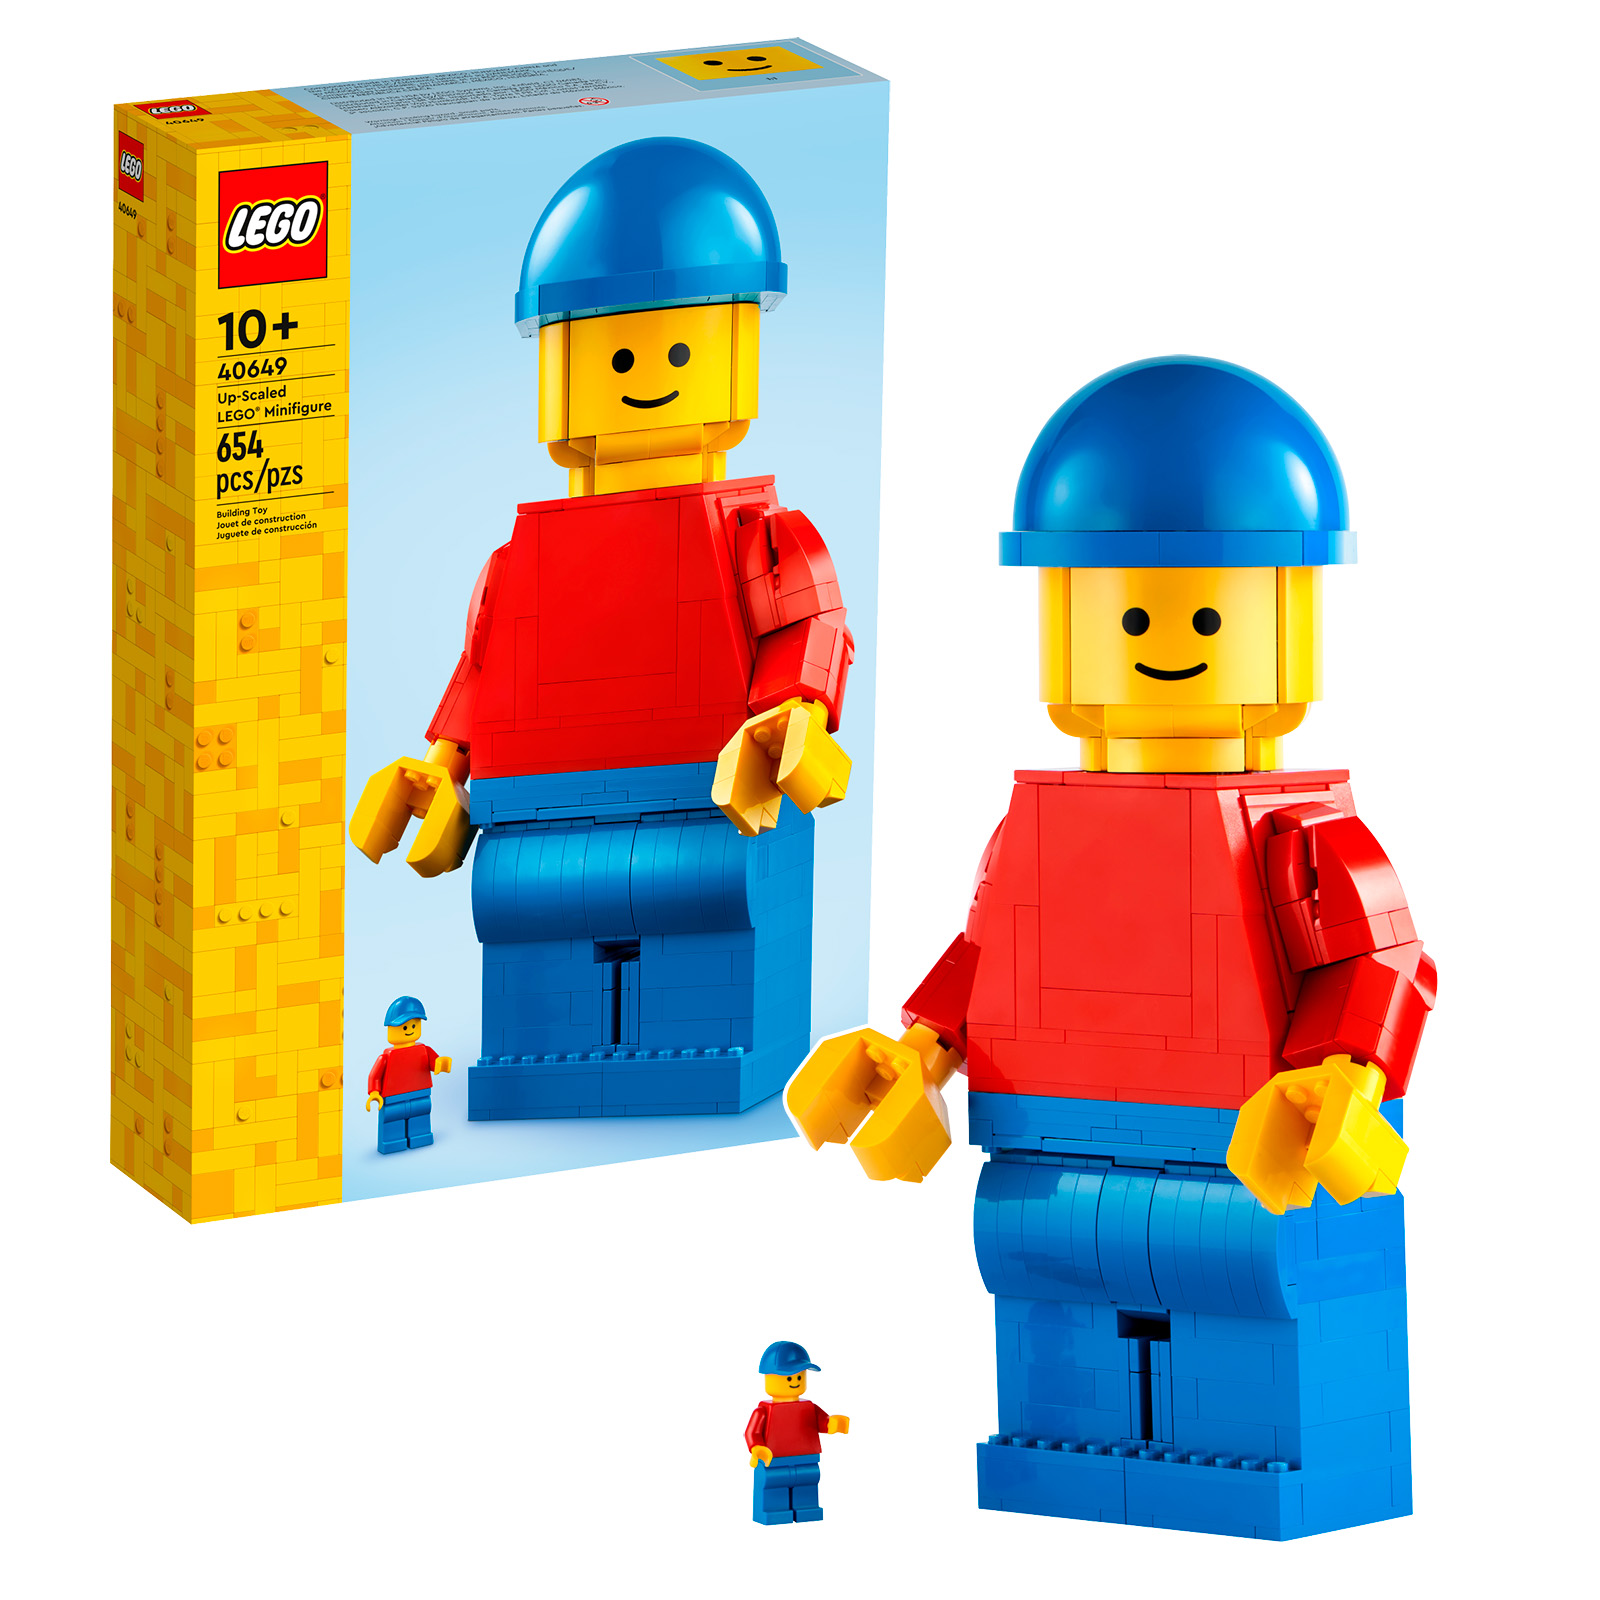 Minifigurine LEGO® grand format (40649) - Toys Puissance 3